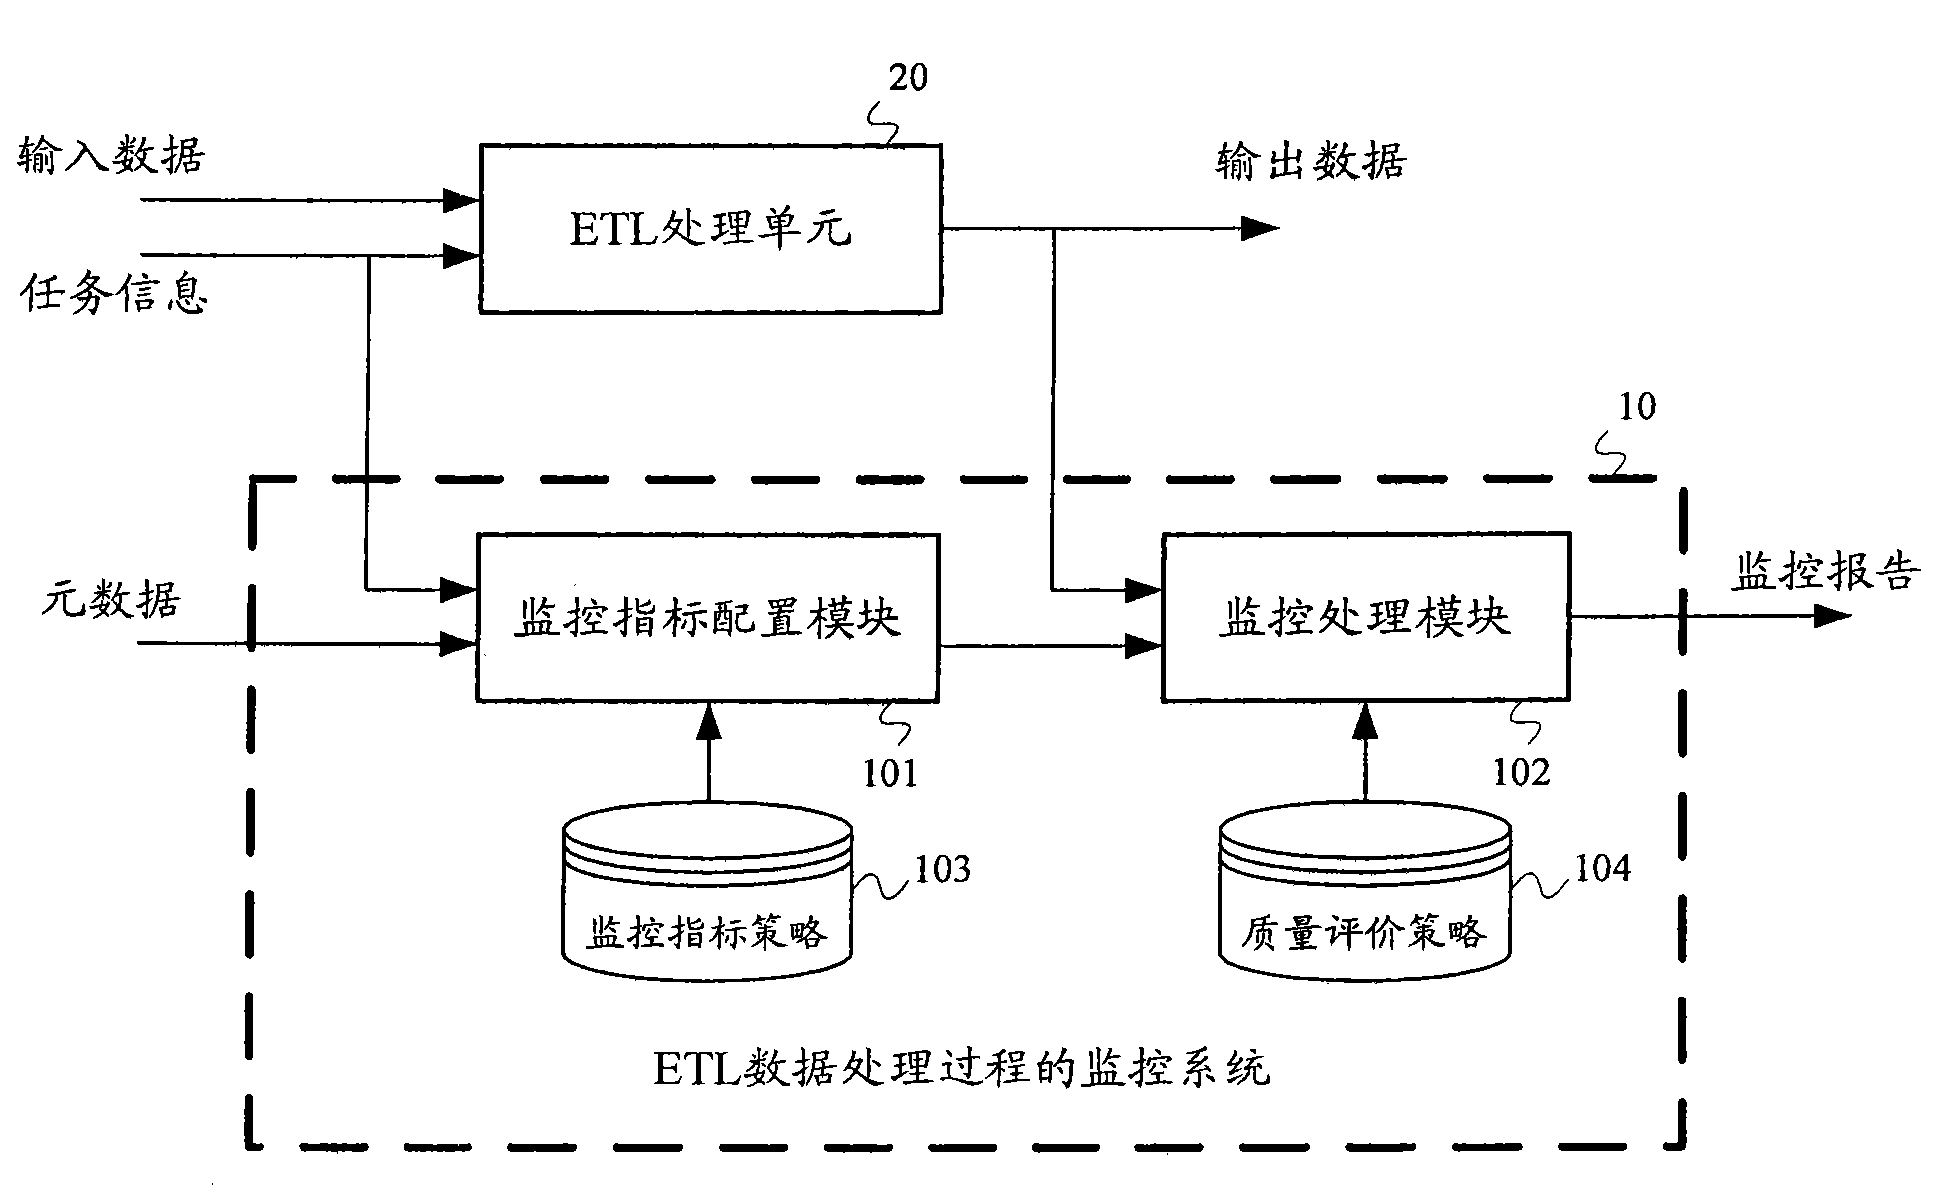 Method and system for monitoring ETL (extract-transform-load) data processing process